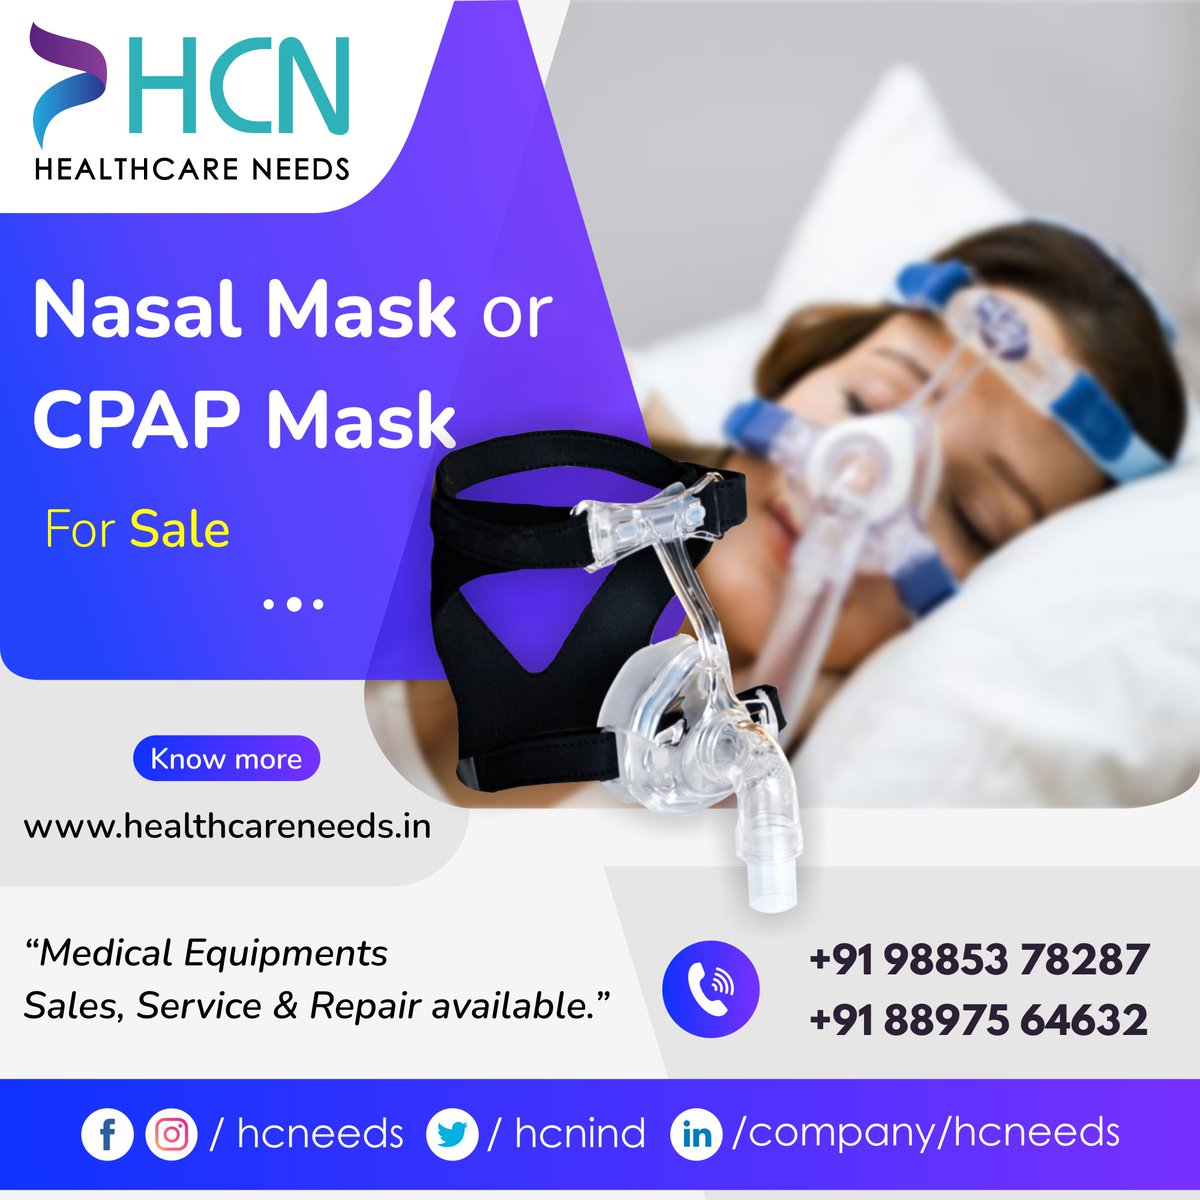 Nasal Mask / CPAP Mask for Sale.
Medical Equipment for Sale & Rent, Service & Repair also Available.

Healthcareneeds is one of the best Nasal Mask / CPAP Mask Provider/Supplier in Hyderabad, Telangana & Andhra Pradesh.

#nasalmask #cpapmask #cpapmaskforsale #nasalmaskforsale